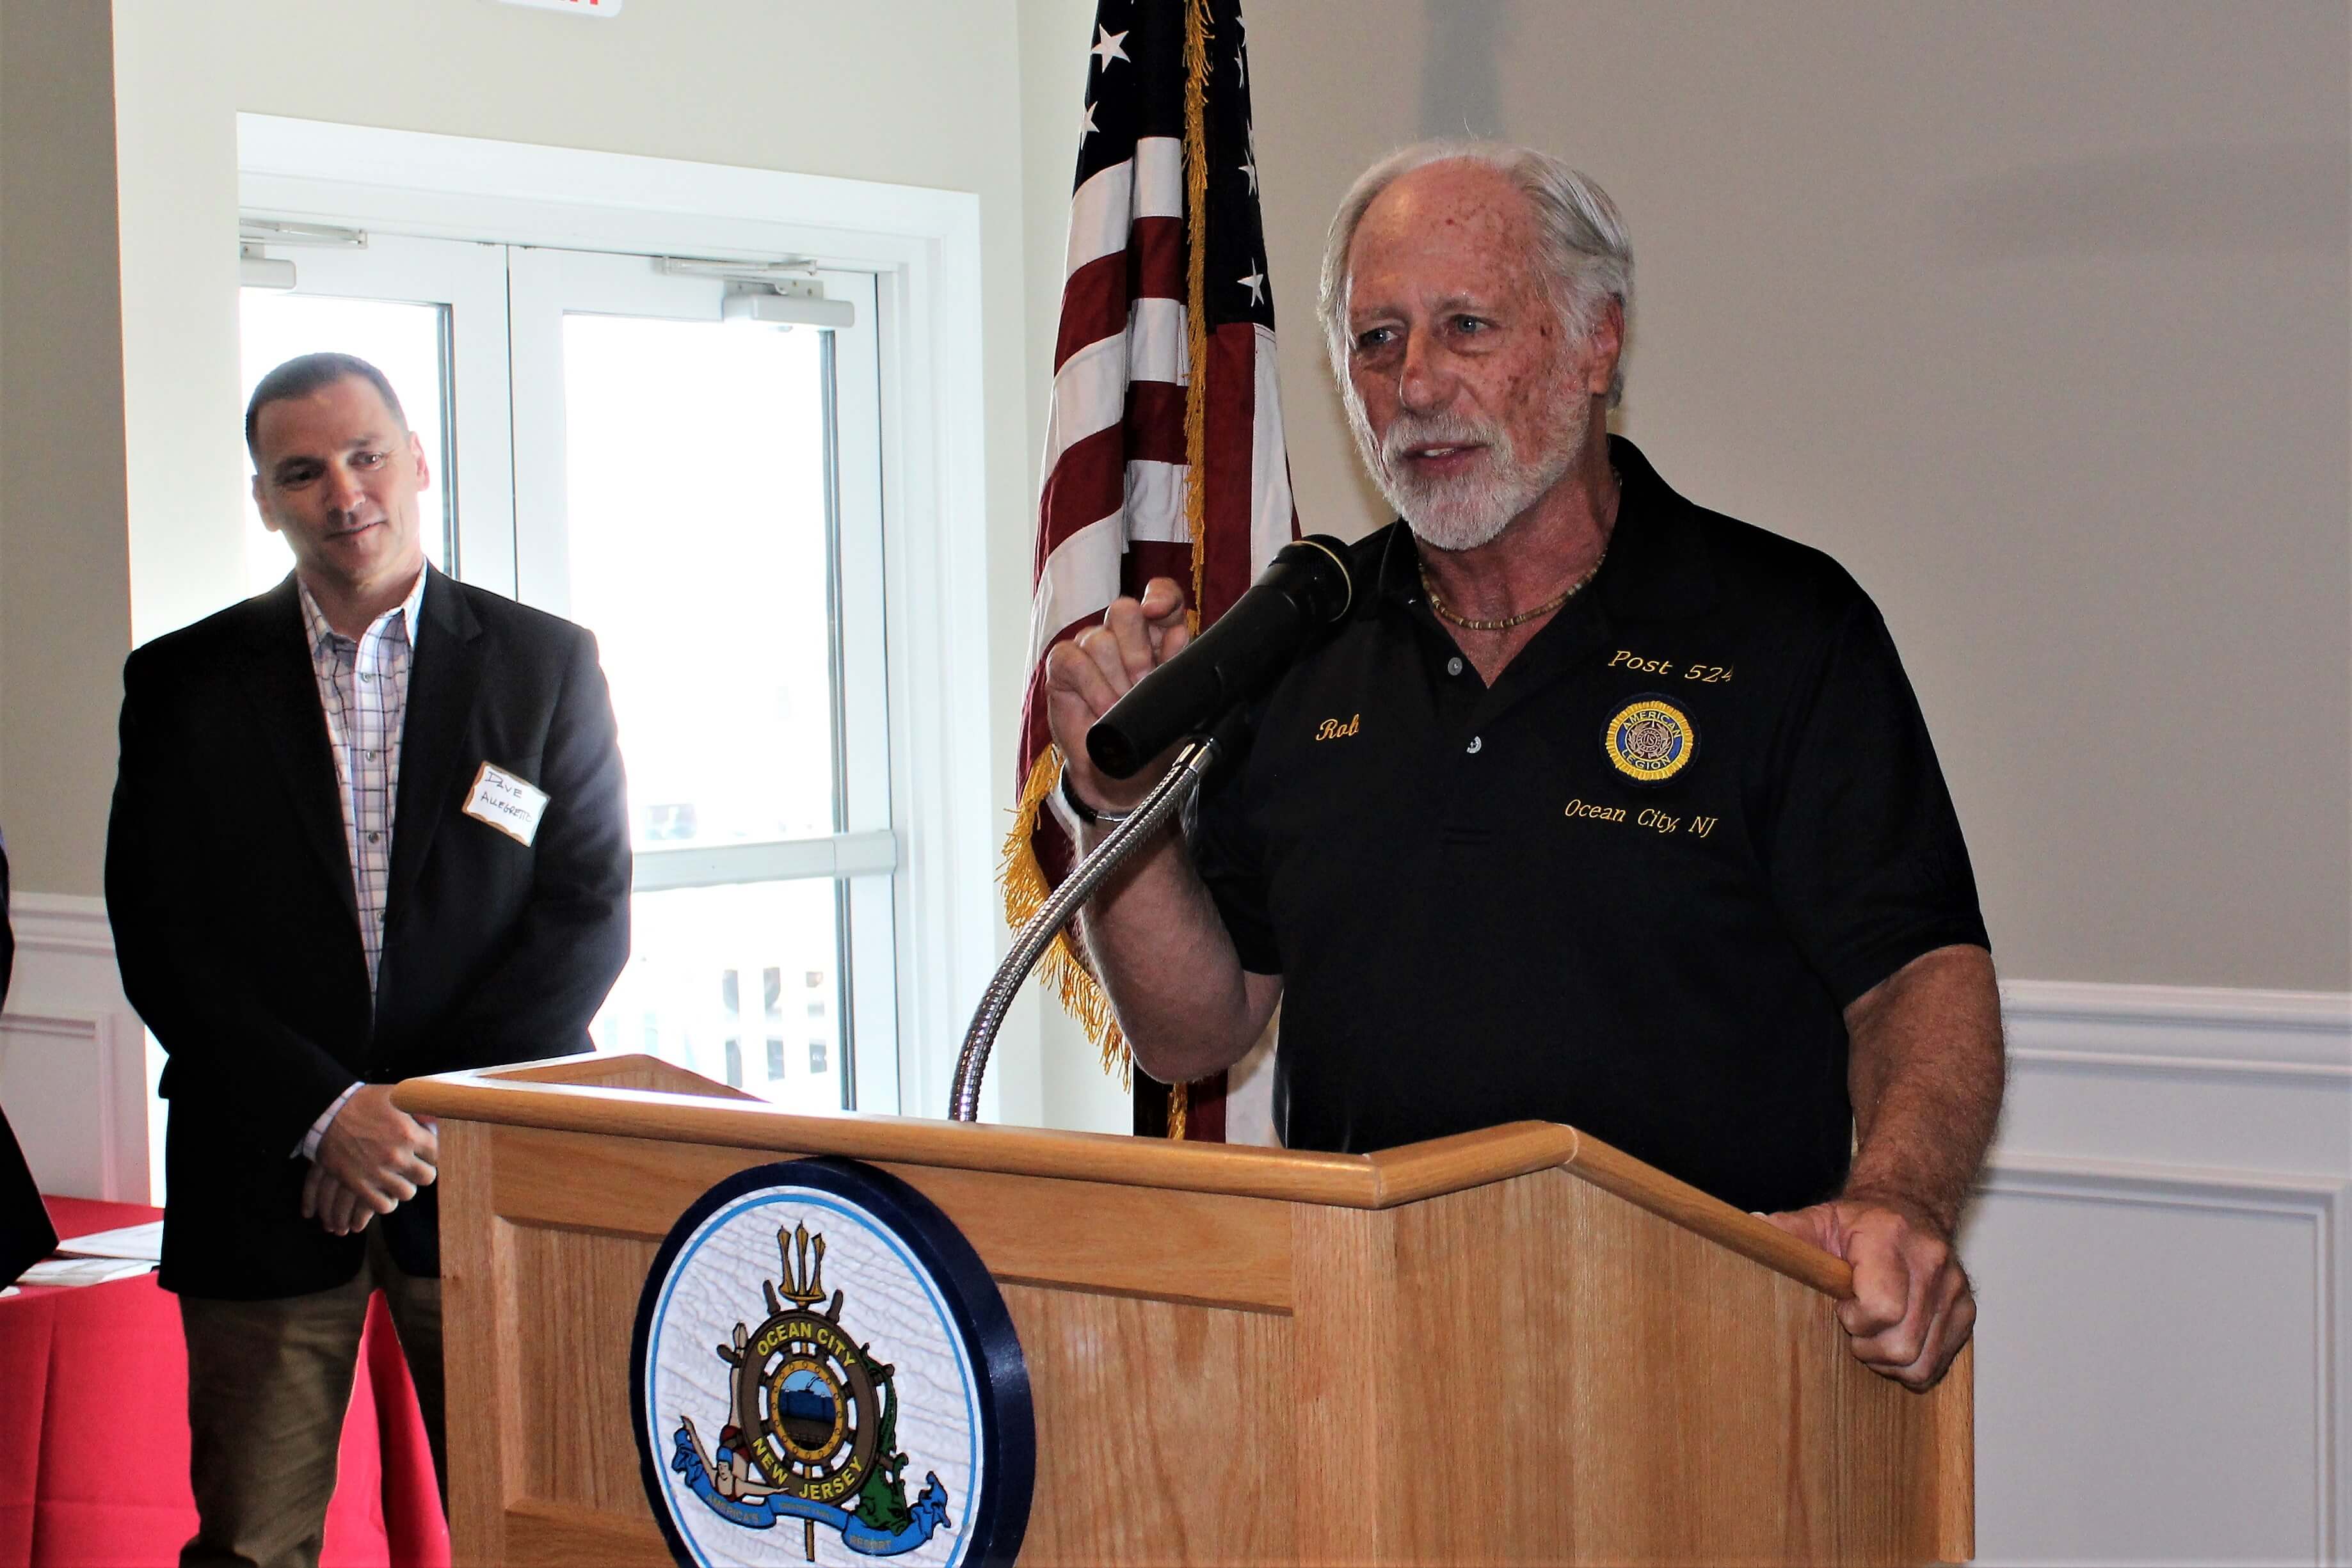 American Legion member Rob Cozen welcomes the Greater Ocean City Chamber of Commerce to the new Morvay-Miley American Legion Post 524 building at 46th Street and West Avenue at a lunch meeting April 12. Years in the works